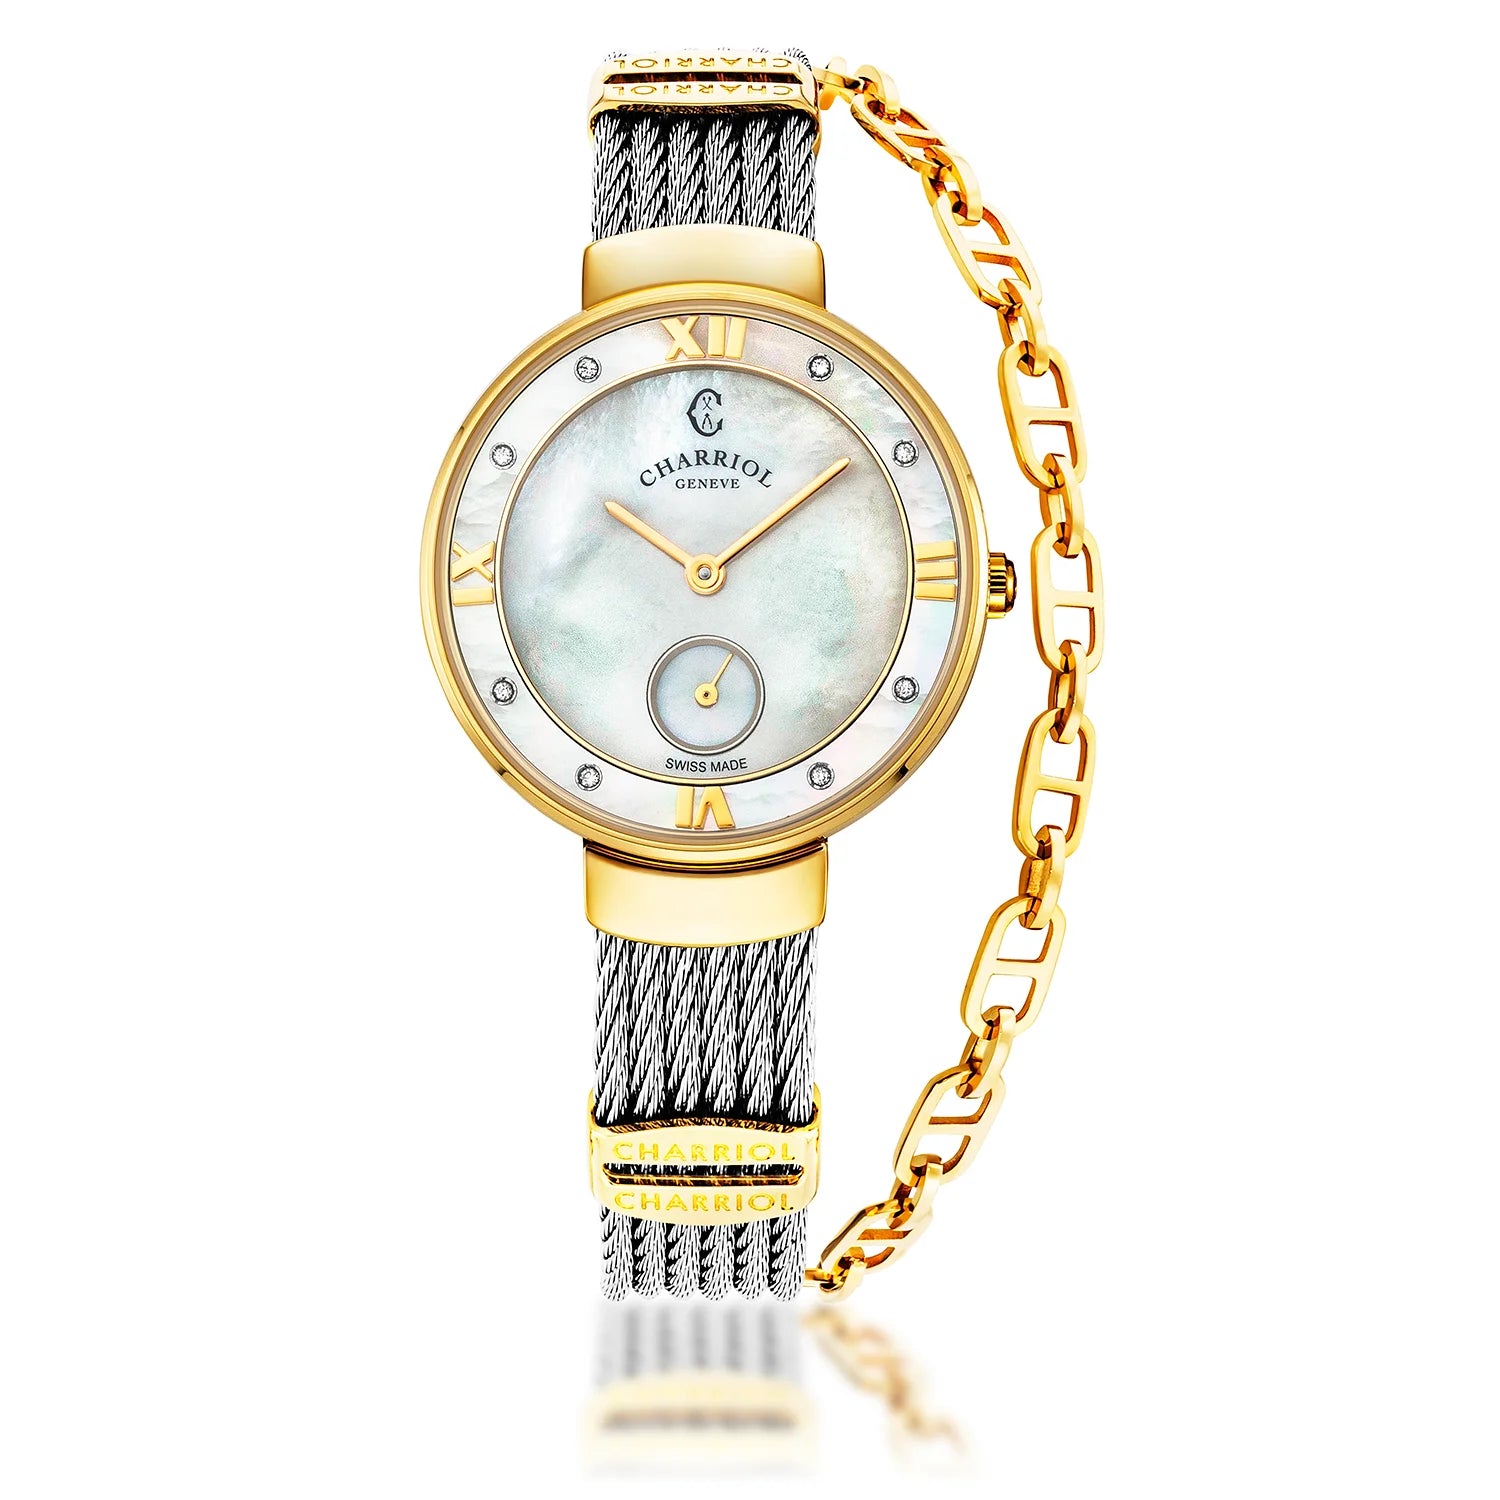 ST TROPEZ, 30MM, QUARTZ CALIBRE, MOTHER-OF-PEARL DIAL, MOTHER-OF-PEARL WITH 8 DIAMONDS BEZEL, STEEL CABLE BRACELET - Charriol Geneve -  Watch